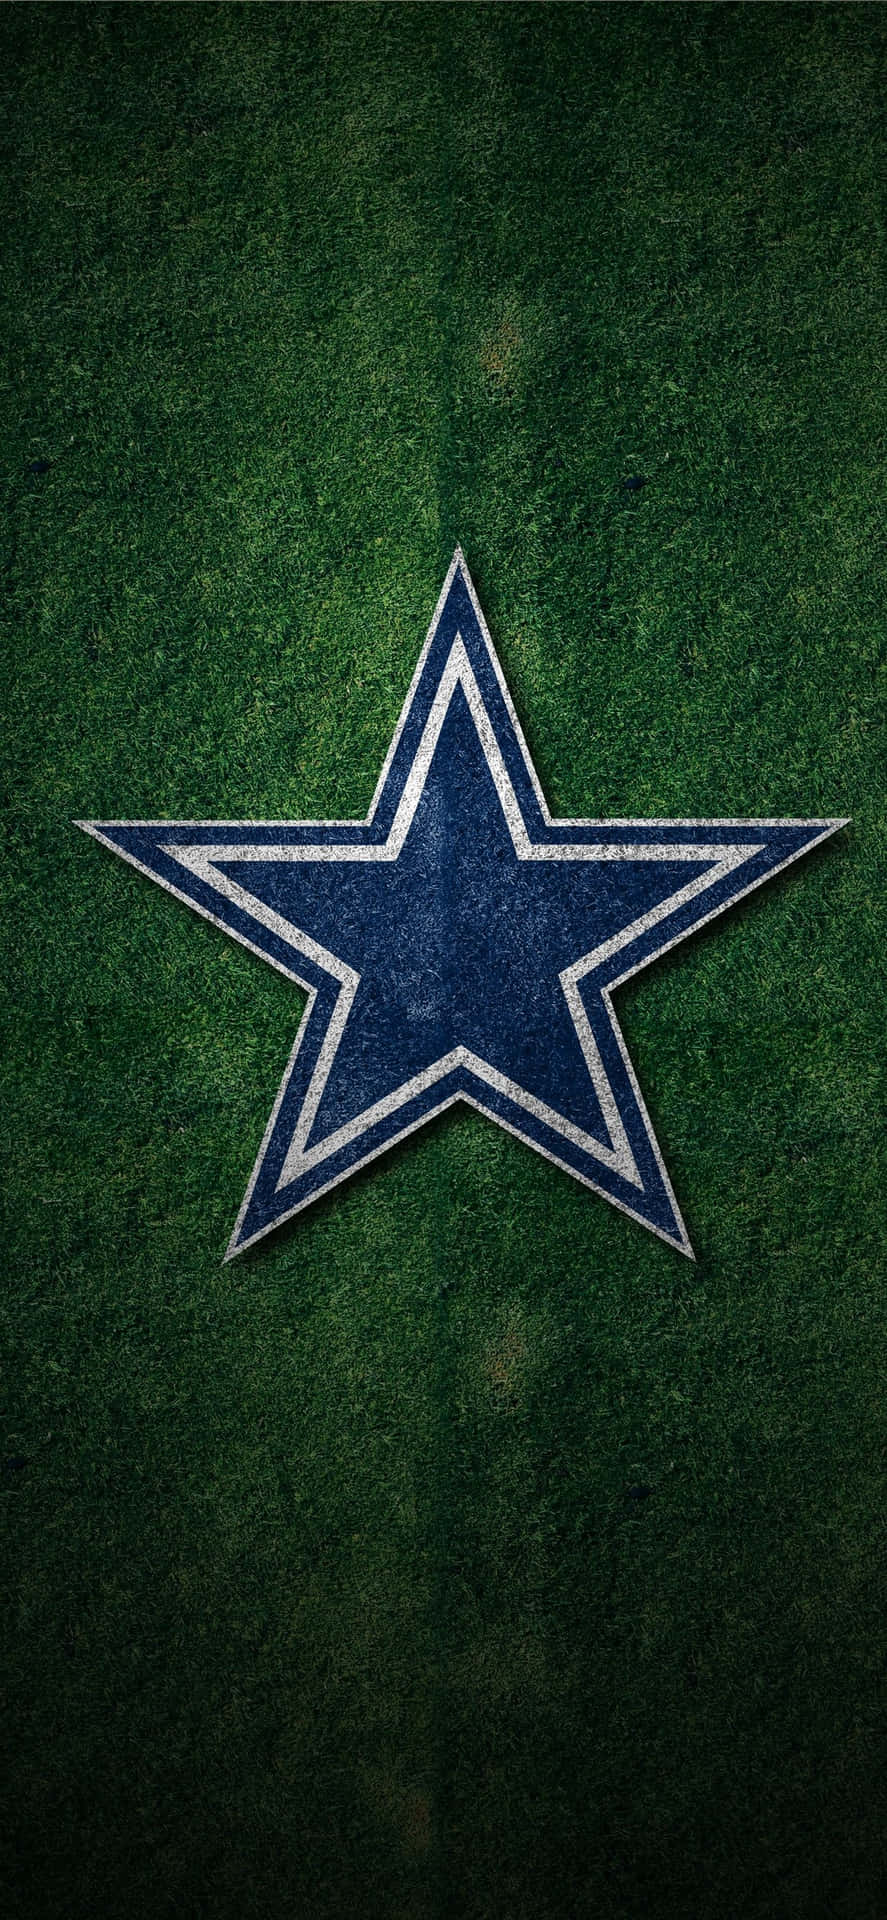 Show Your Support For The Dallas Cowboys With An Iphone! Wallpaper